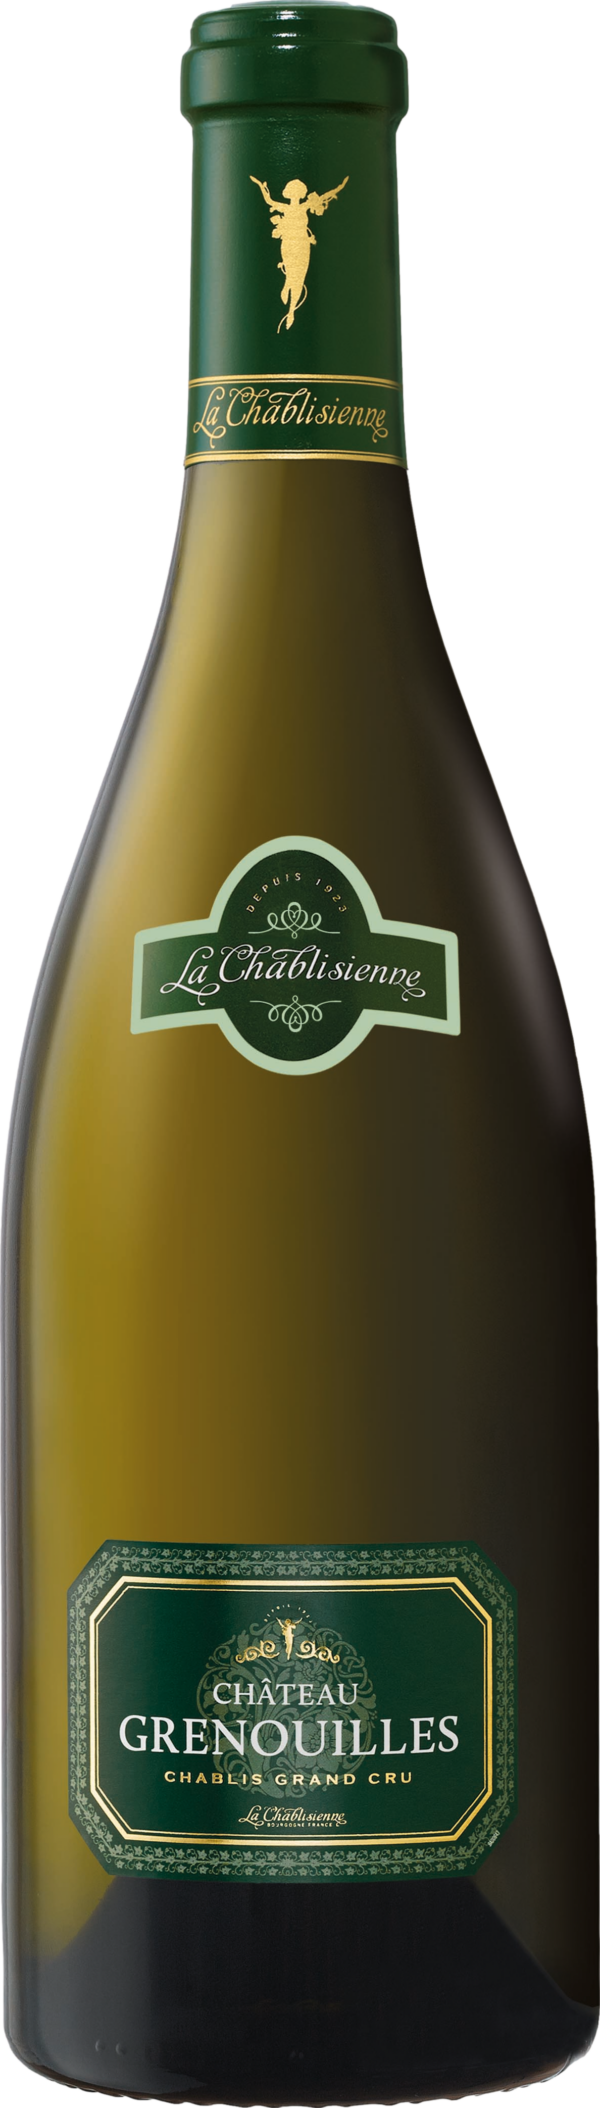 Product image of La Chablisienne Chablis Grand Cru Chateau Grenouilles 2020 from 8wines